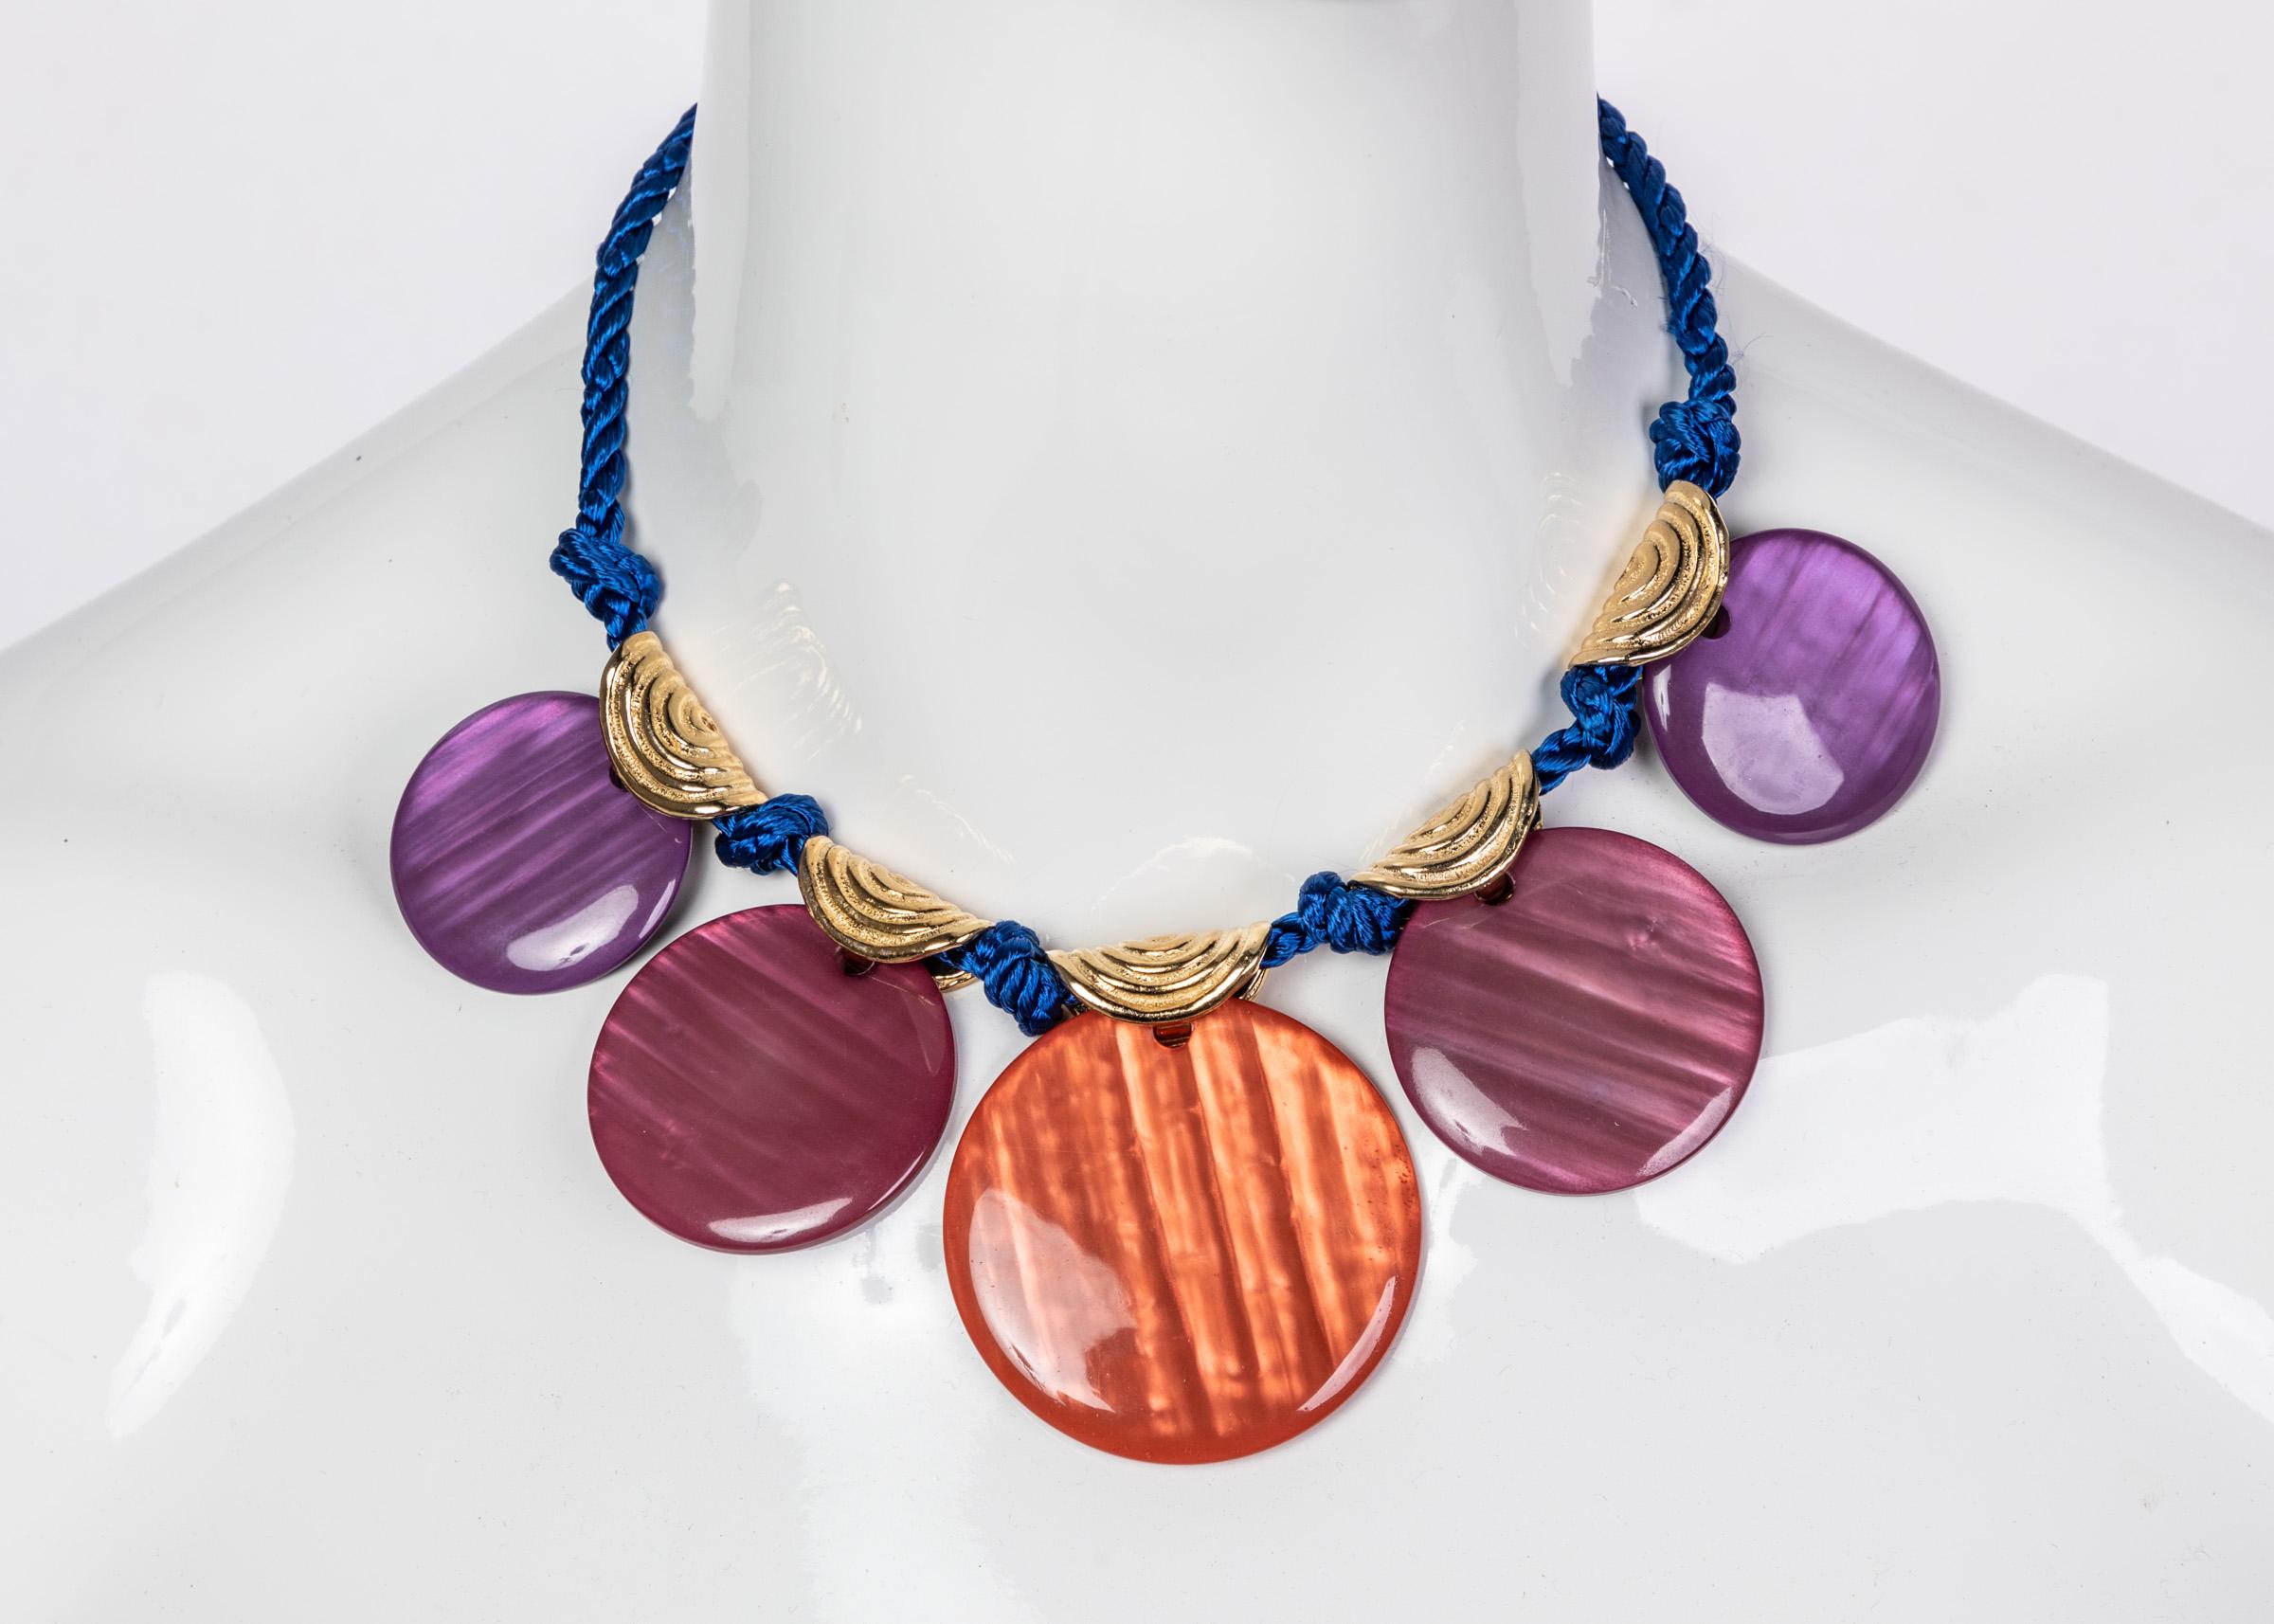 With any outfit, the accessories are half the battle. For all of his collections, YSL was sure to create accessories to elevate his ensembles for maximum impact. This necklace is designed from cool toned analogous colors. Five round pendants in